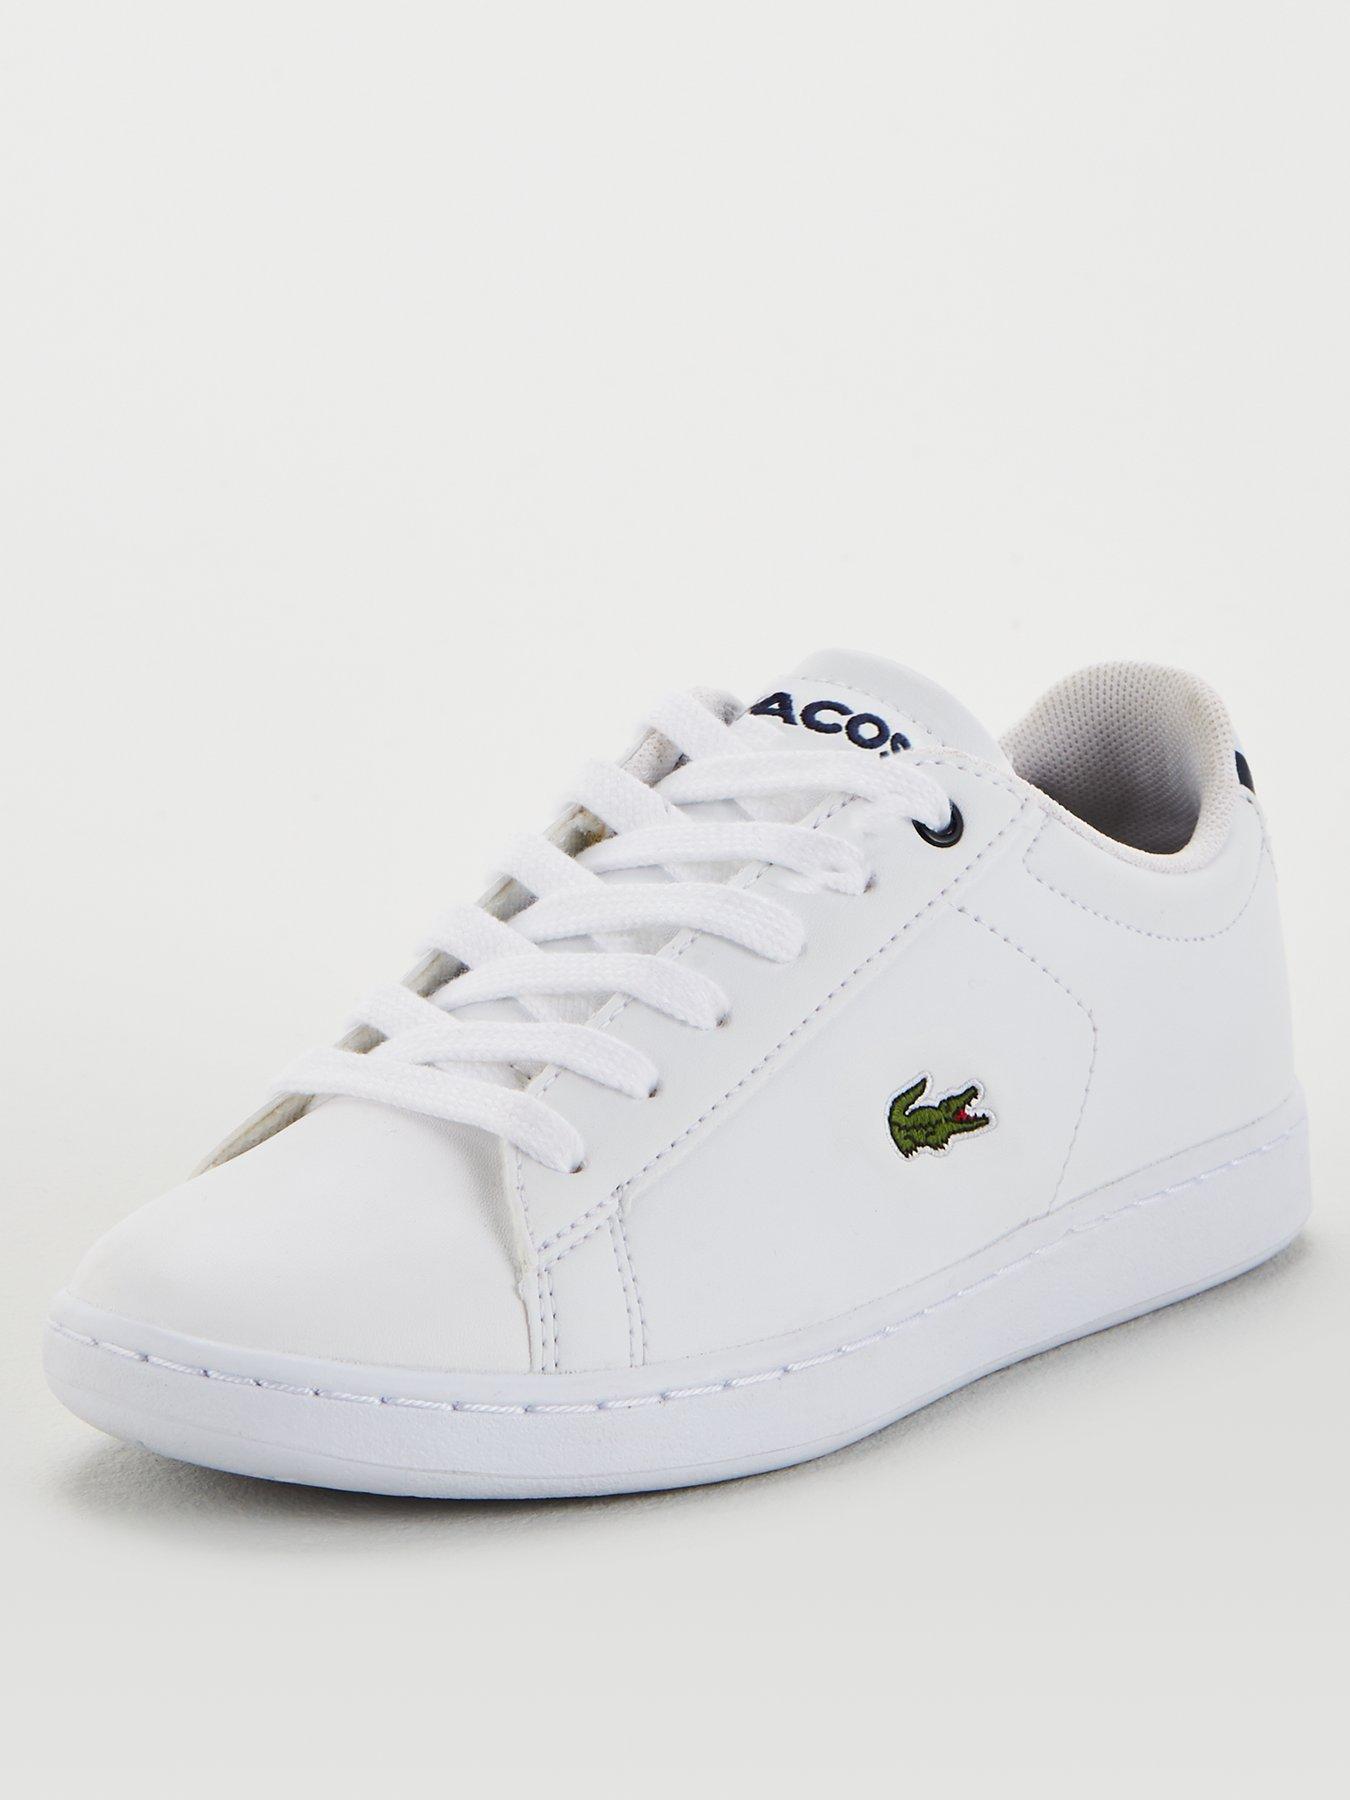 Lacoste Carnaby Evo 120 Lace Up 